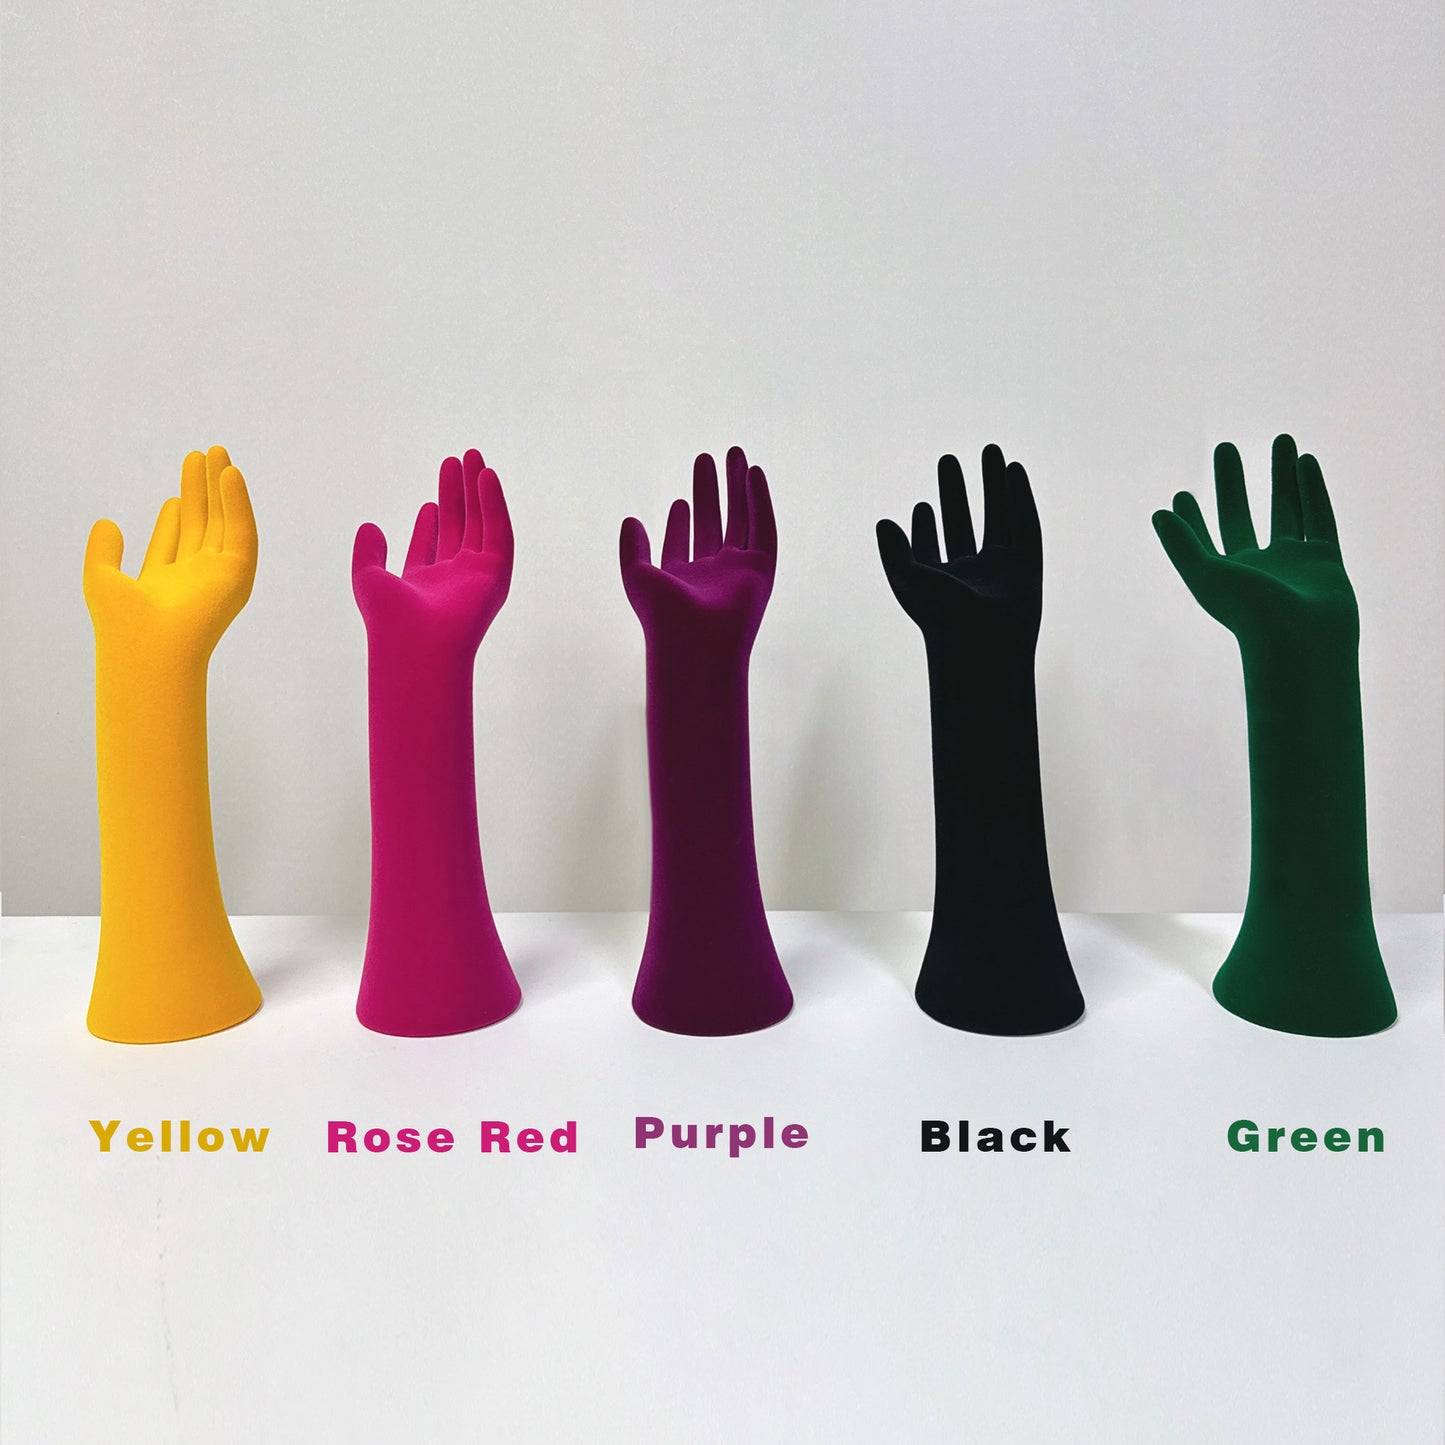 Jelimate High End Left Female Mannequin Hand Stand,Colorful Velvet Dress Form Ring Display Hand Model Props,Sunglasses Jewelry Display Mannequin Hand